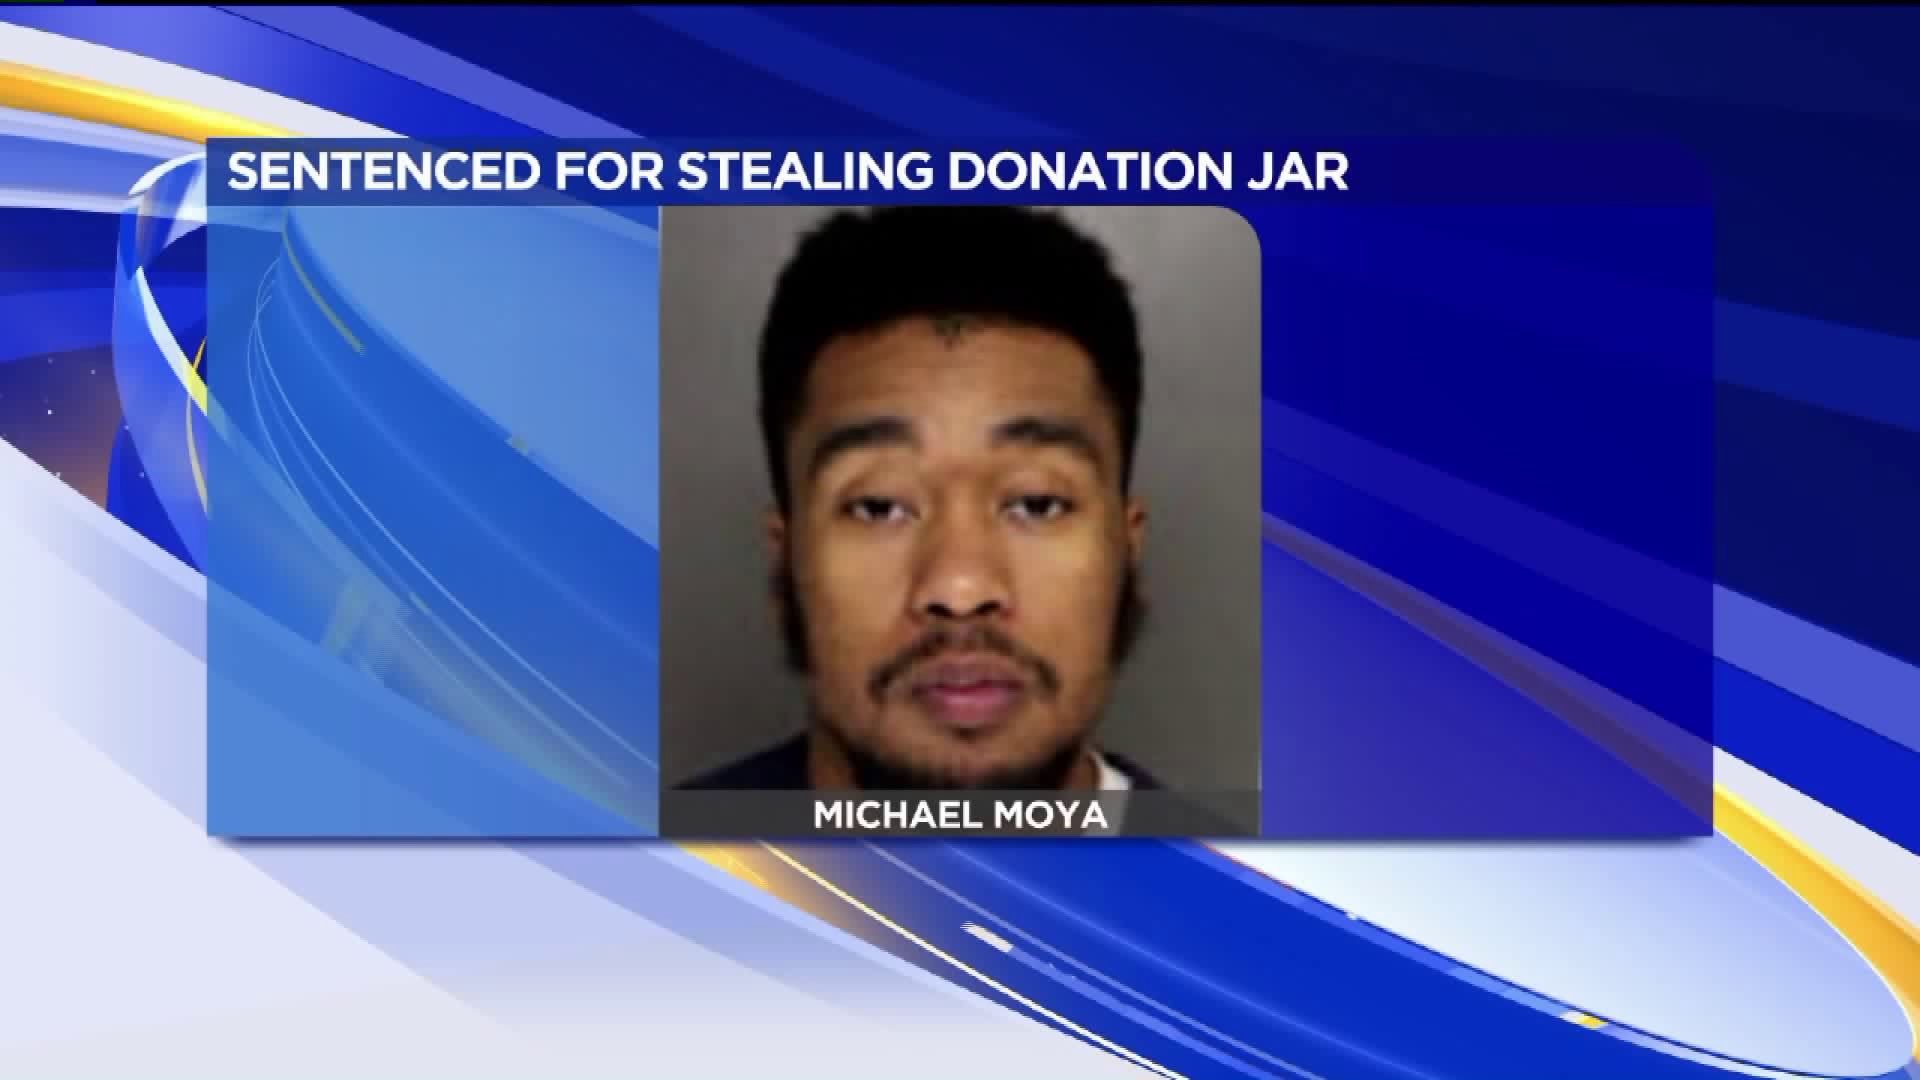 Man Sentenced for Donation Jar Thefts